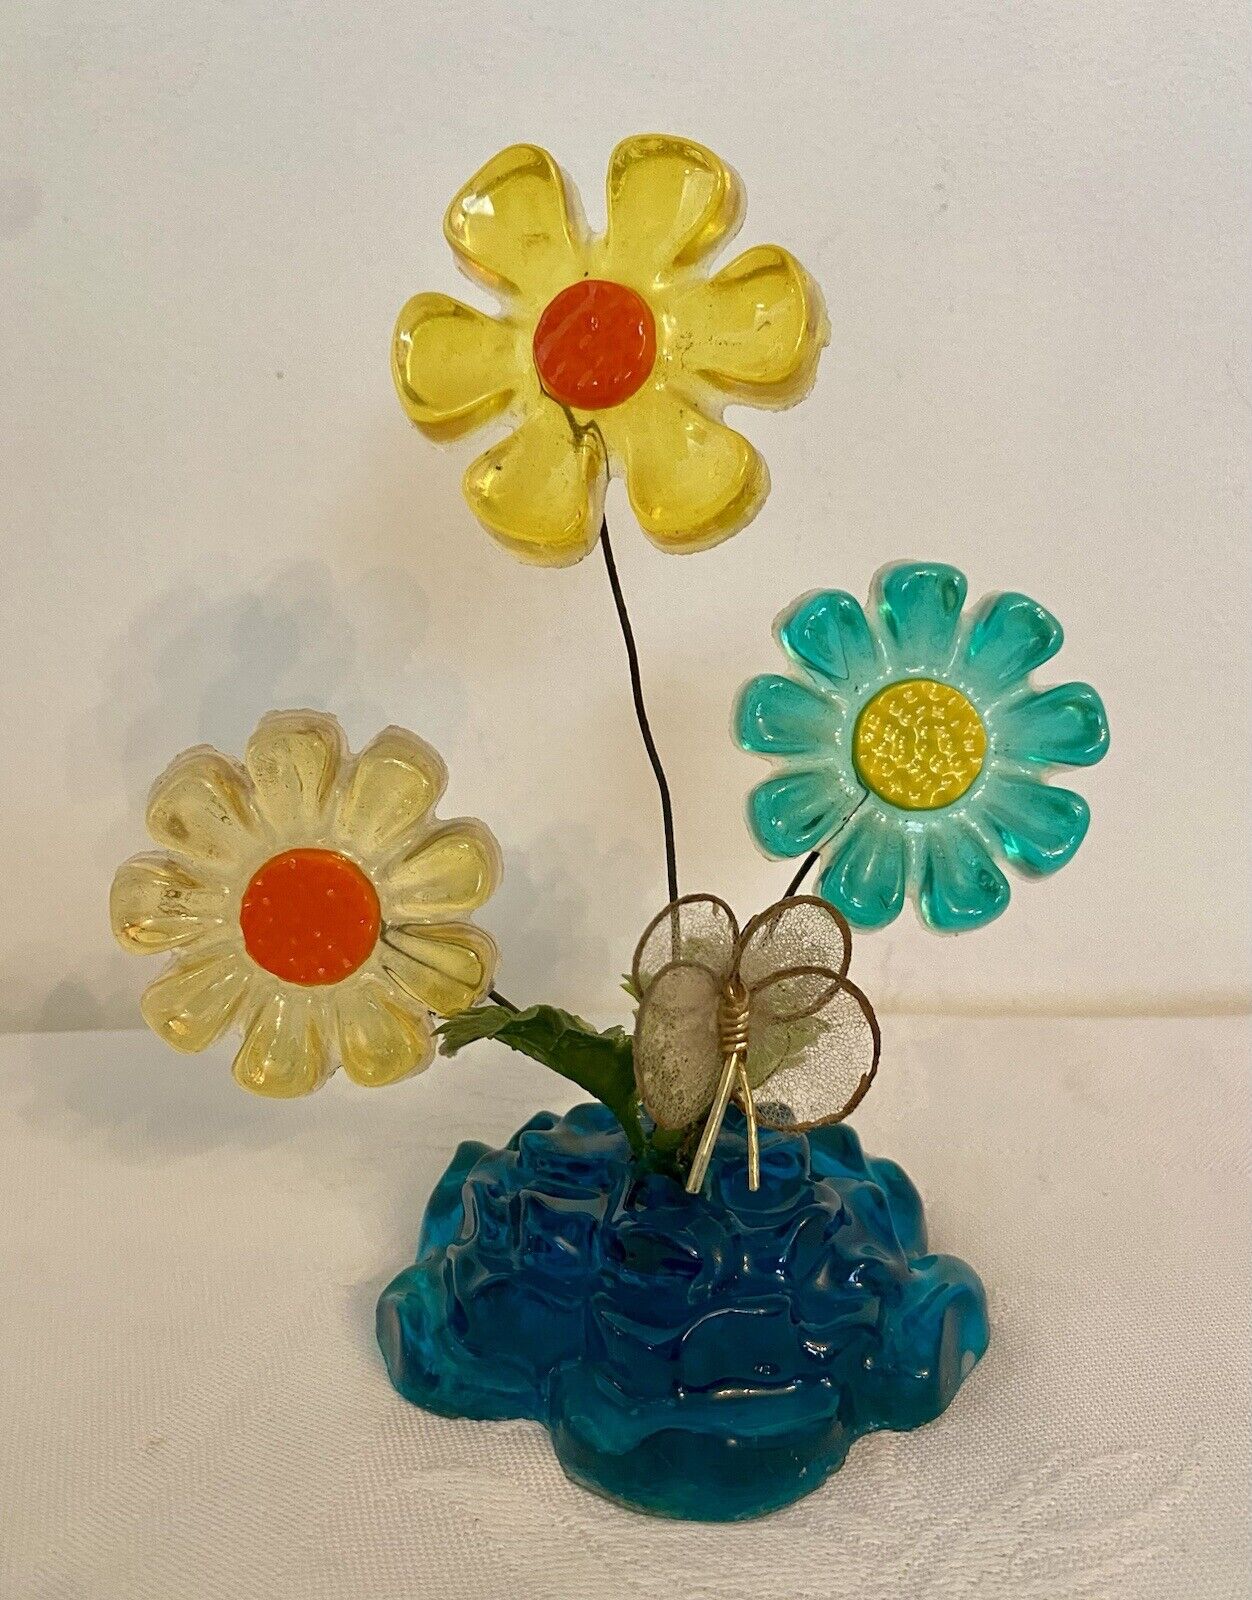 Vintage 1969 Lucite Acrylic Daisy 3 Flower Sculpture with Butterfly New Designs